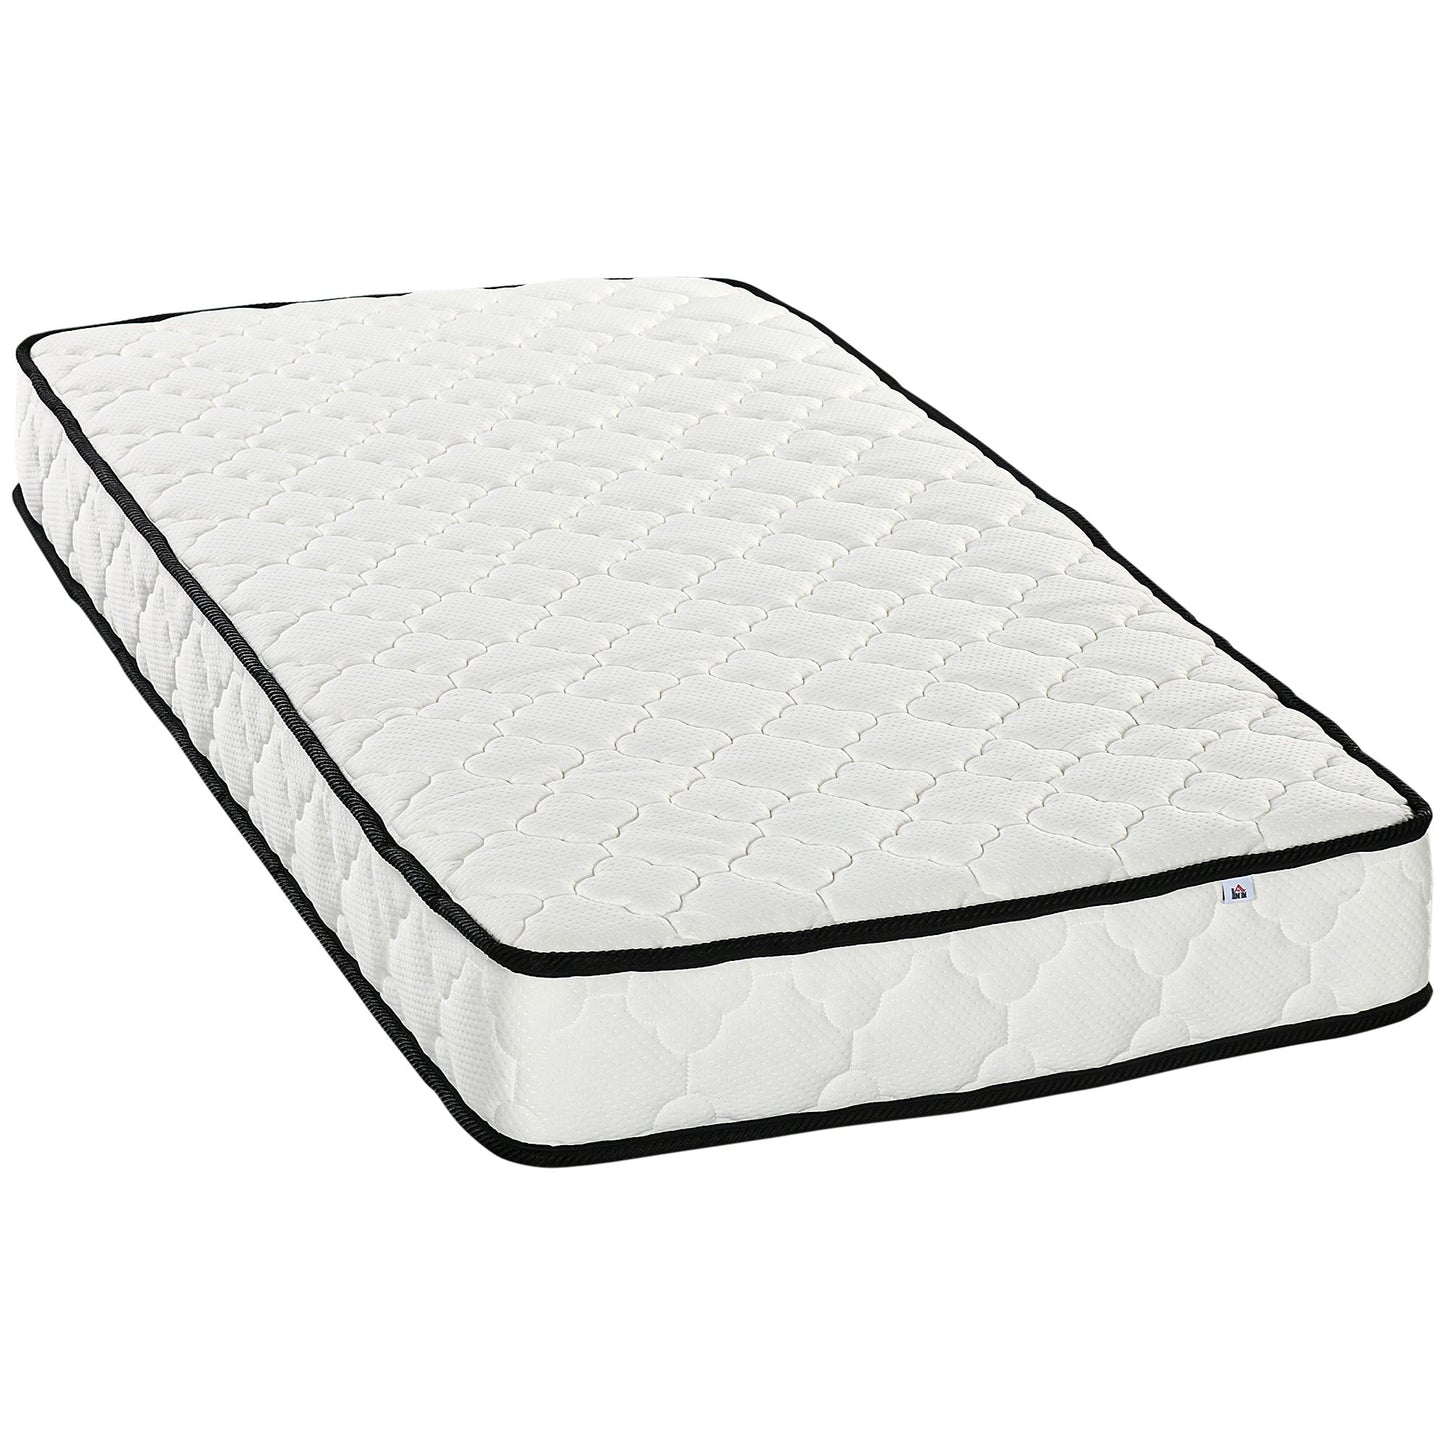 HOMCOM Single Mattress, Pocket Sprung Mattress in a Box with Breathable Foam and Individually Wrapped Spring, 190cmx90cmx18cm, White